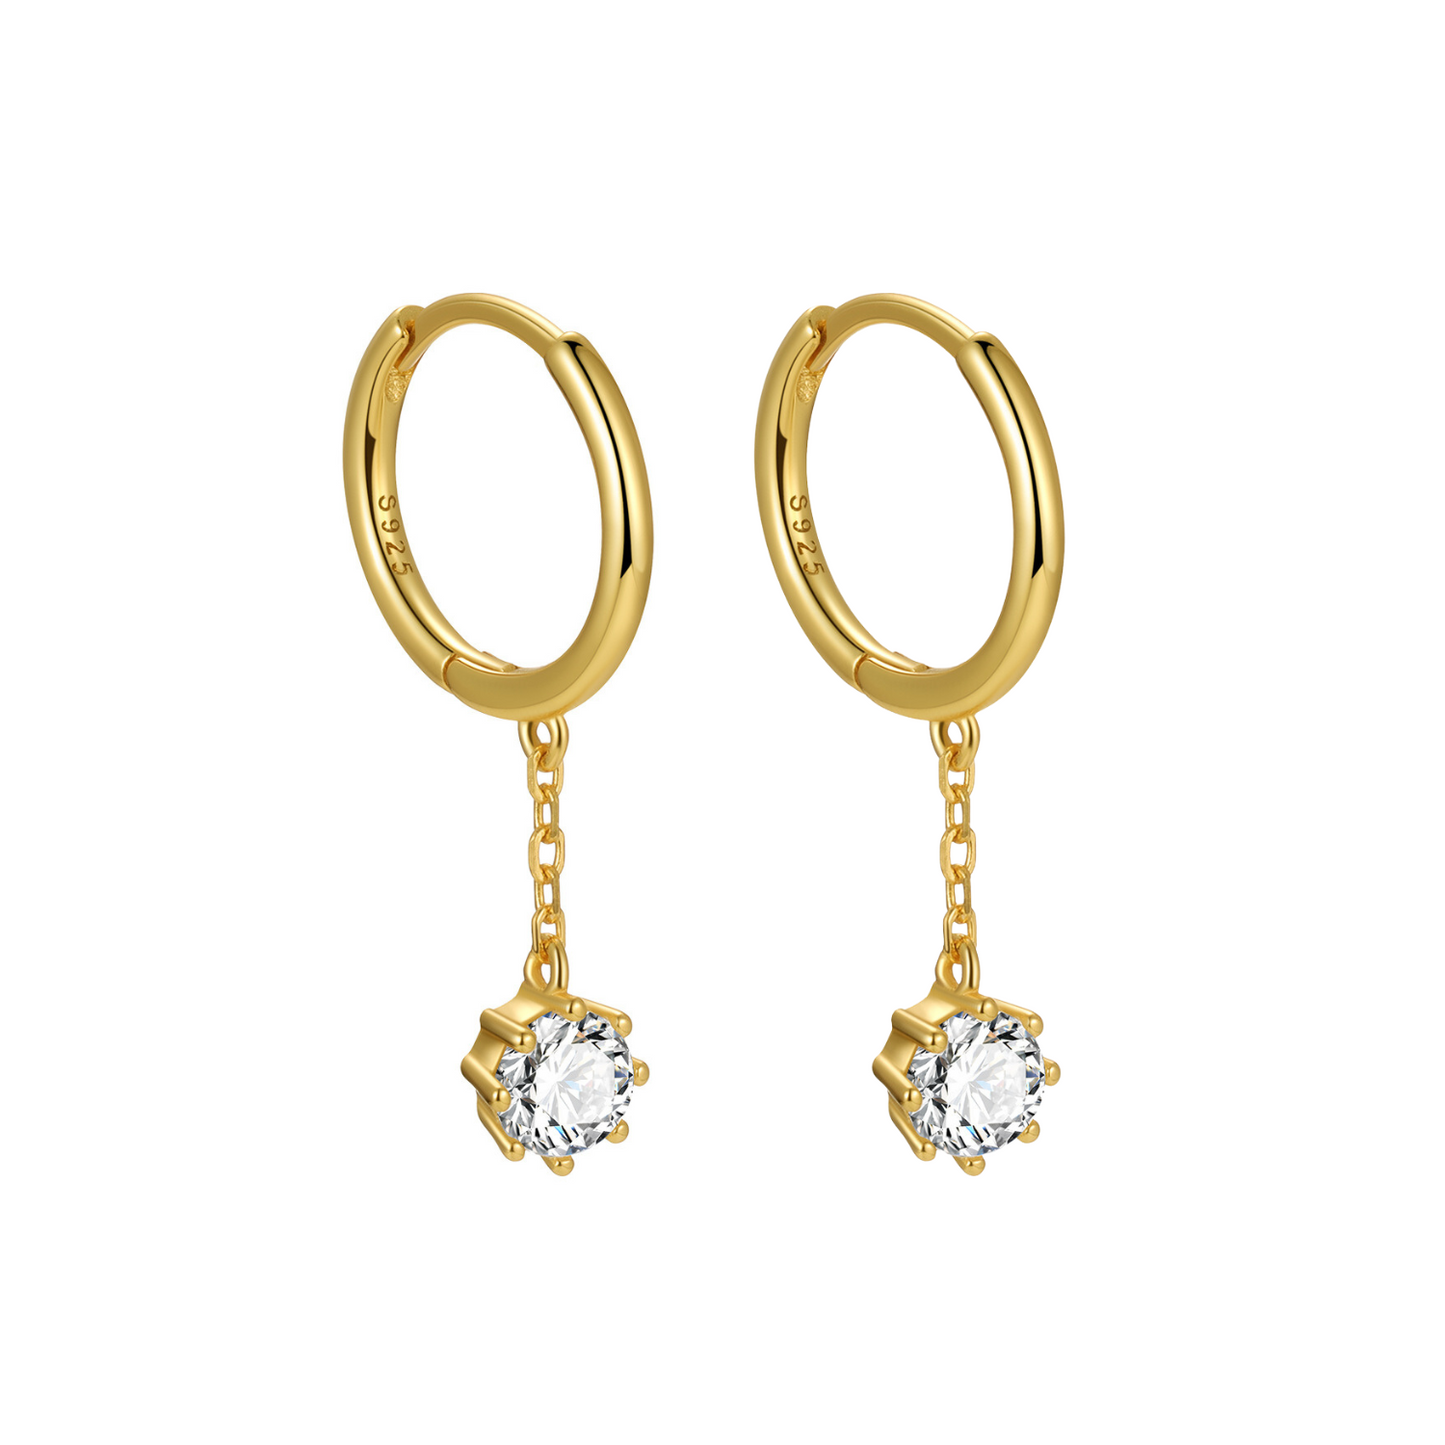 "Starlight" 14K Yellow Gold Plated Drop Huggie Hoop Earrings with CZ Stones